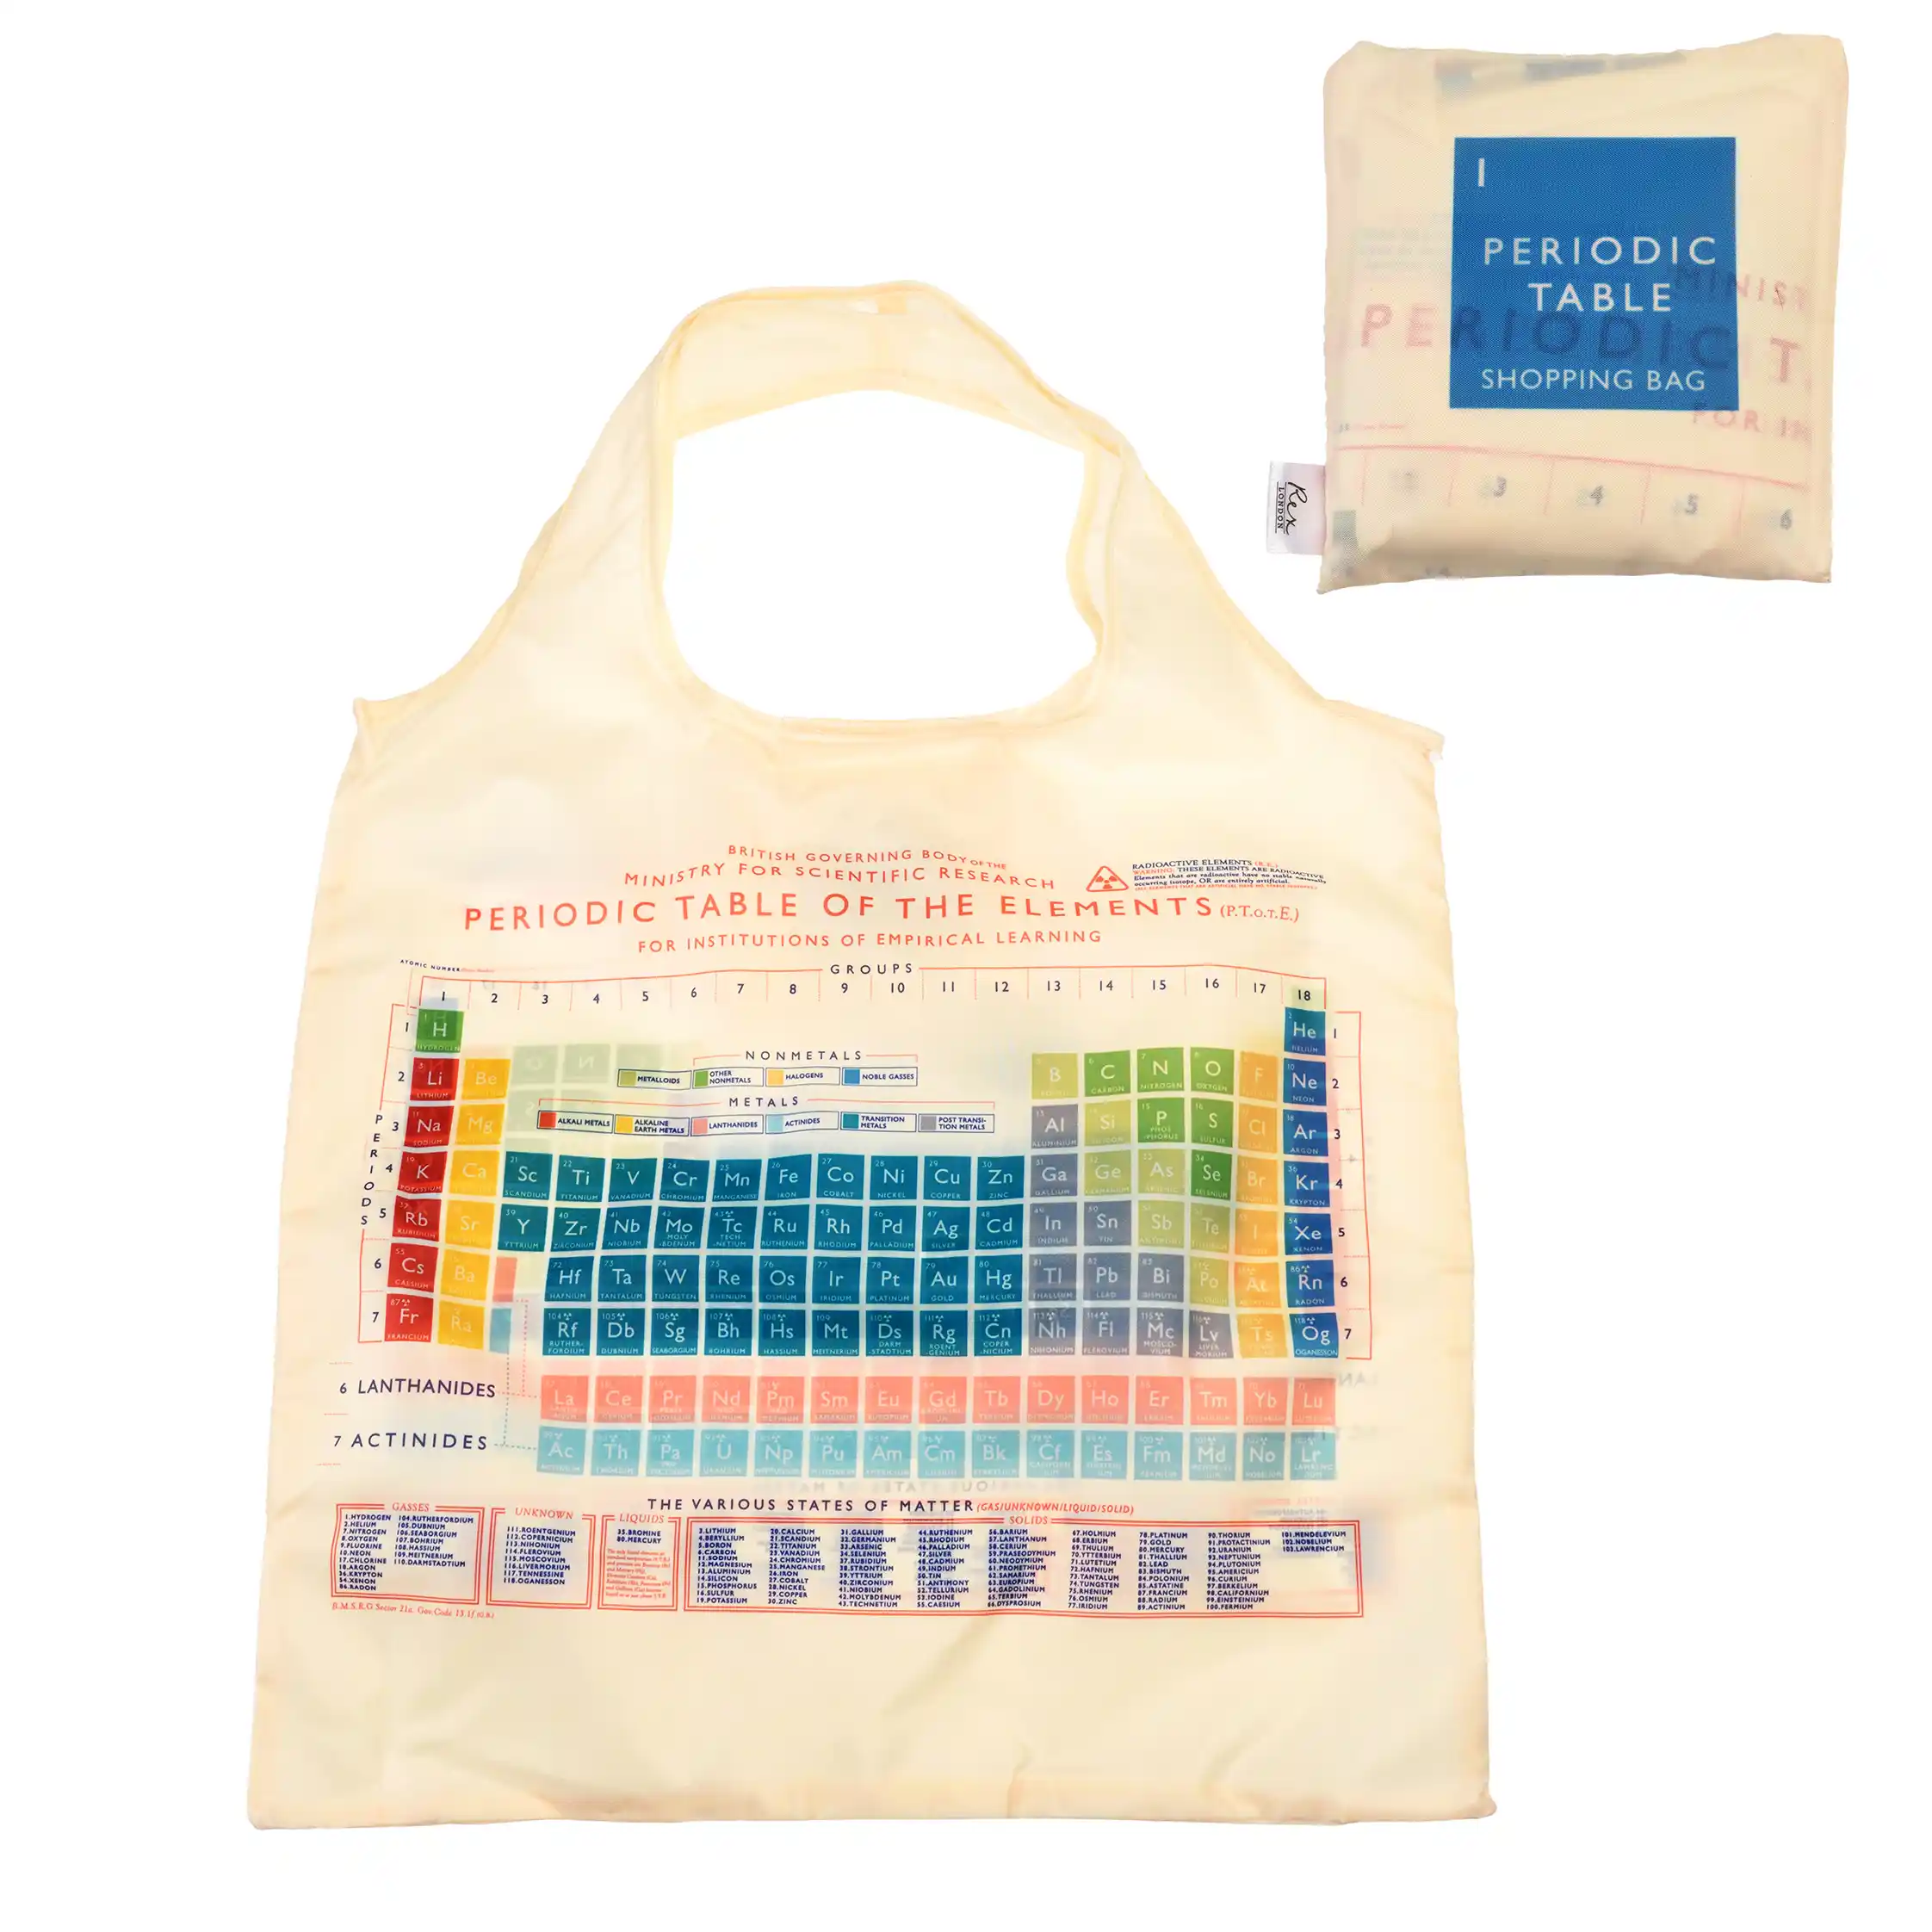 sac à provisions pliable recyclé periodic table